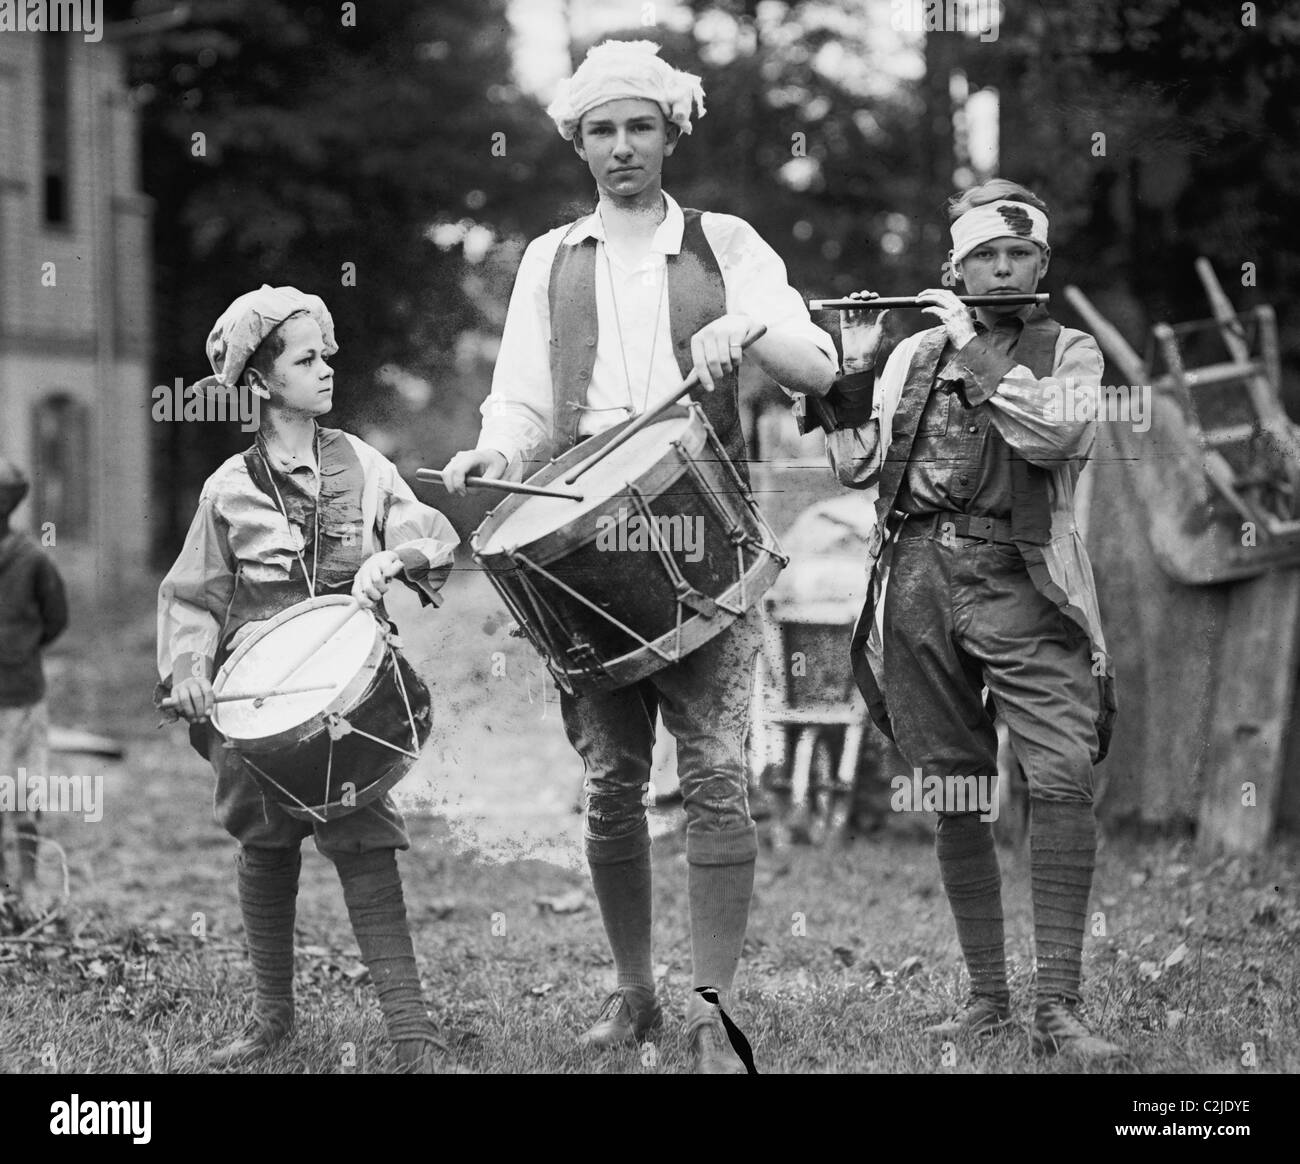 Three Boys March with Instruments on the 4th of July Celebration Stock Photo